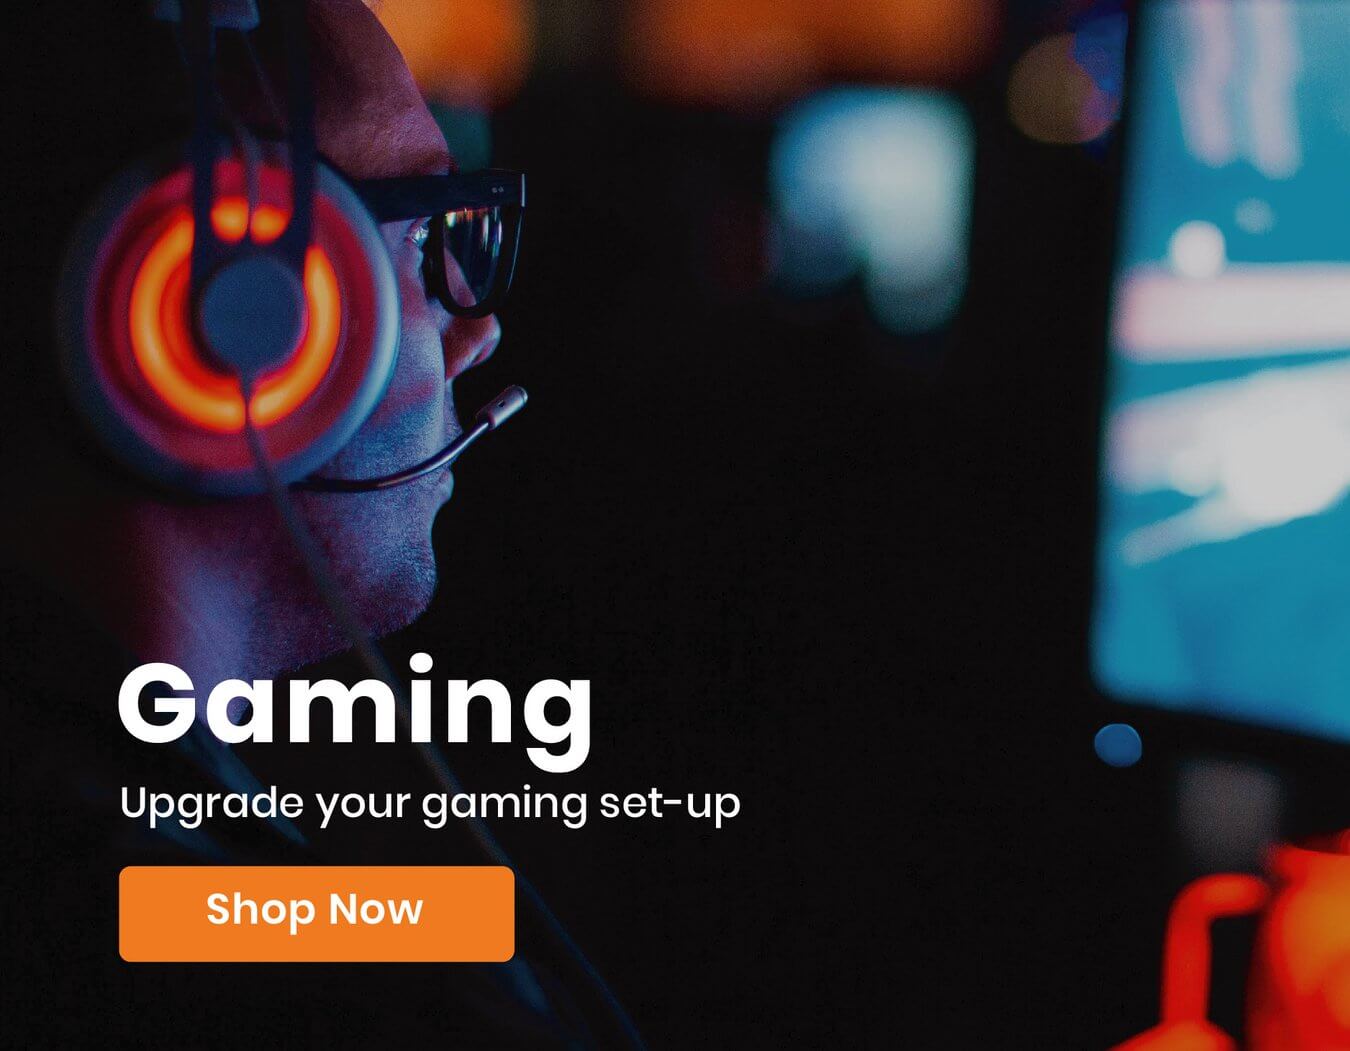 Gaming products, click here to shop them now